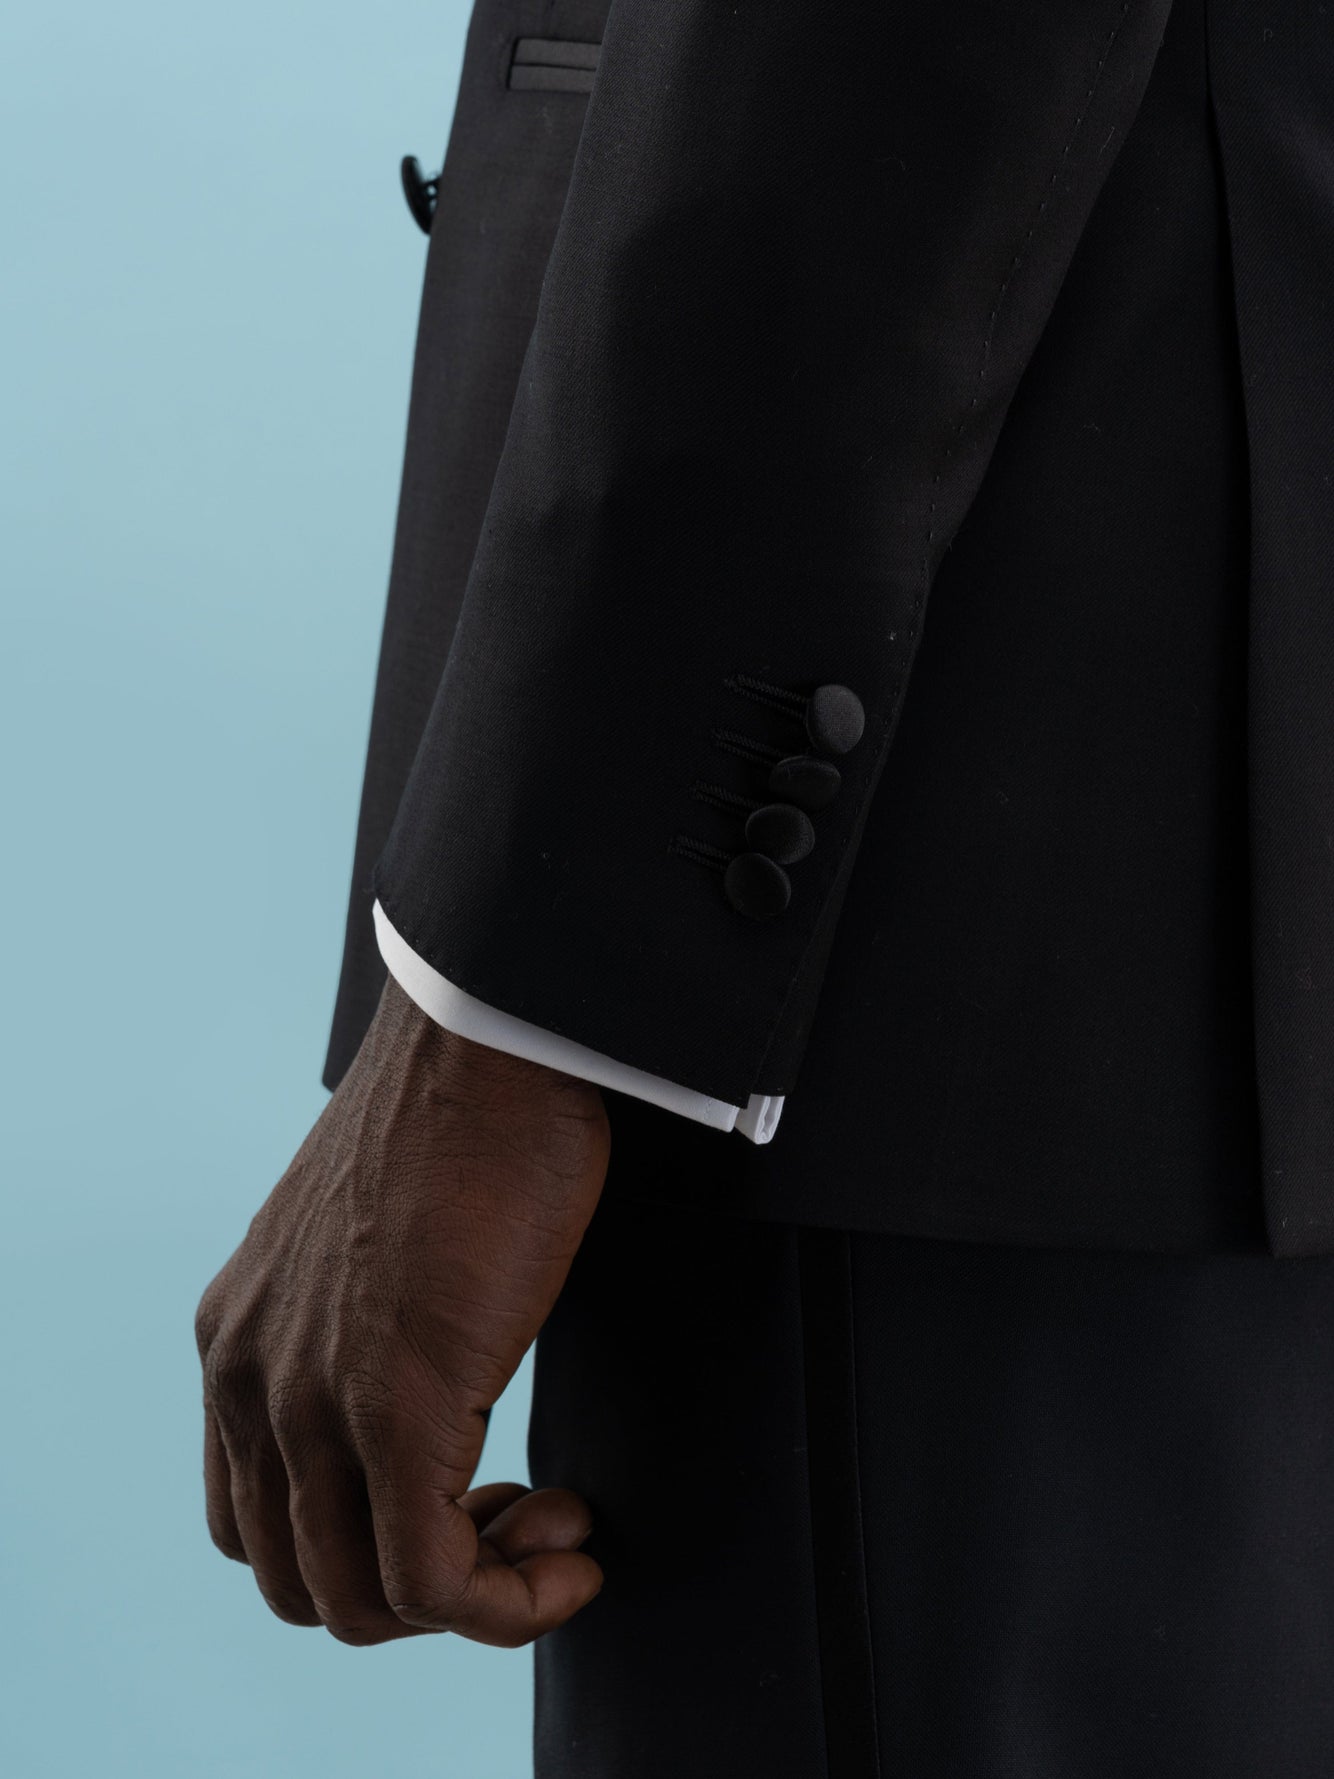 Black Wool Super 130's Tuxedo Suit - Inventory tracking - Grand Le Mar